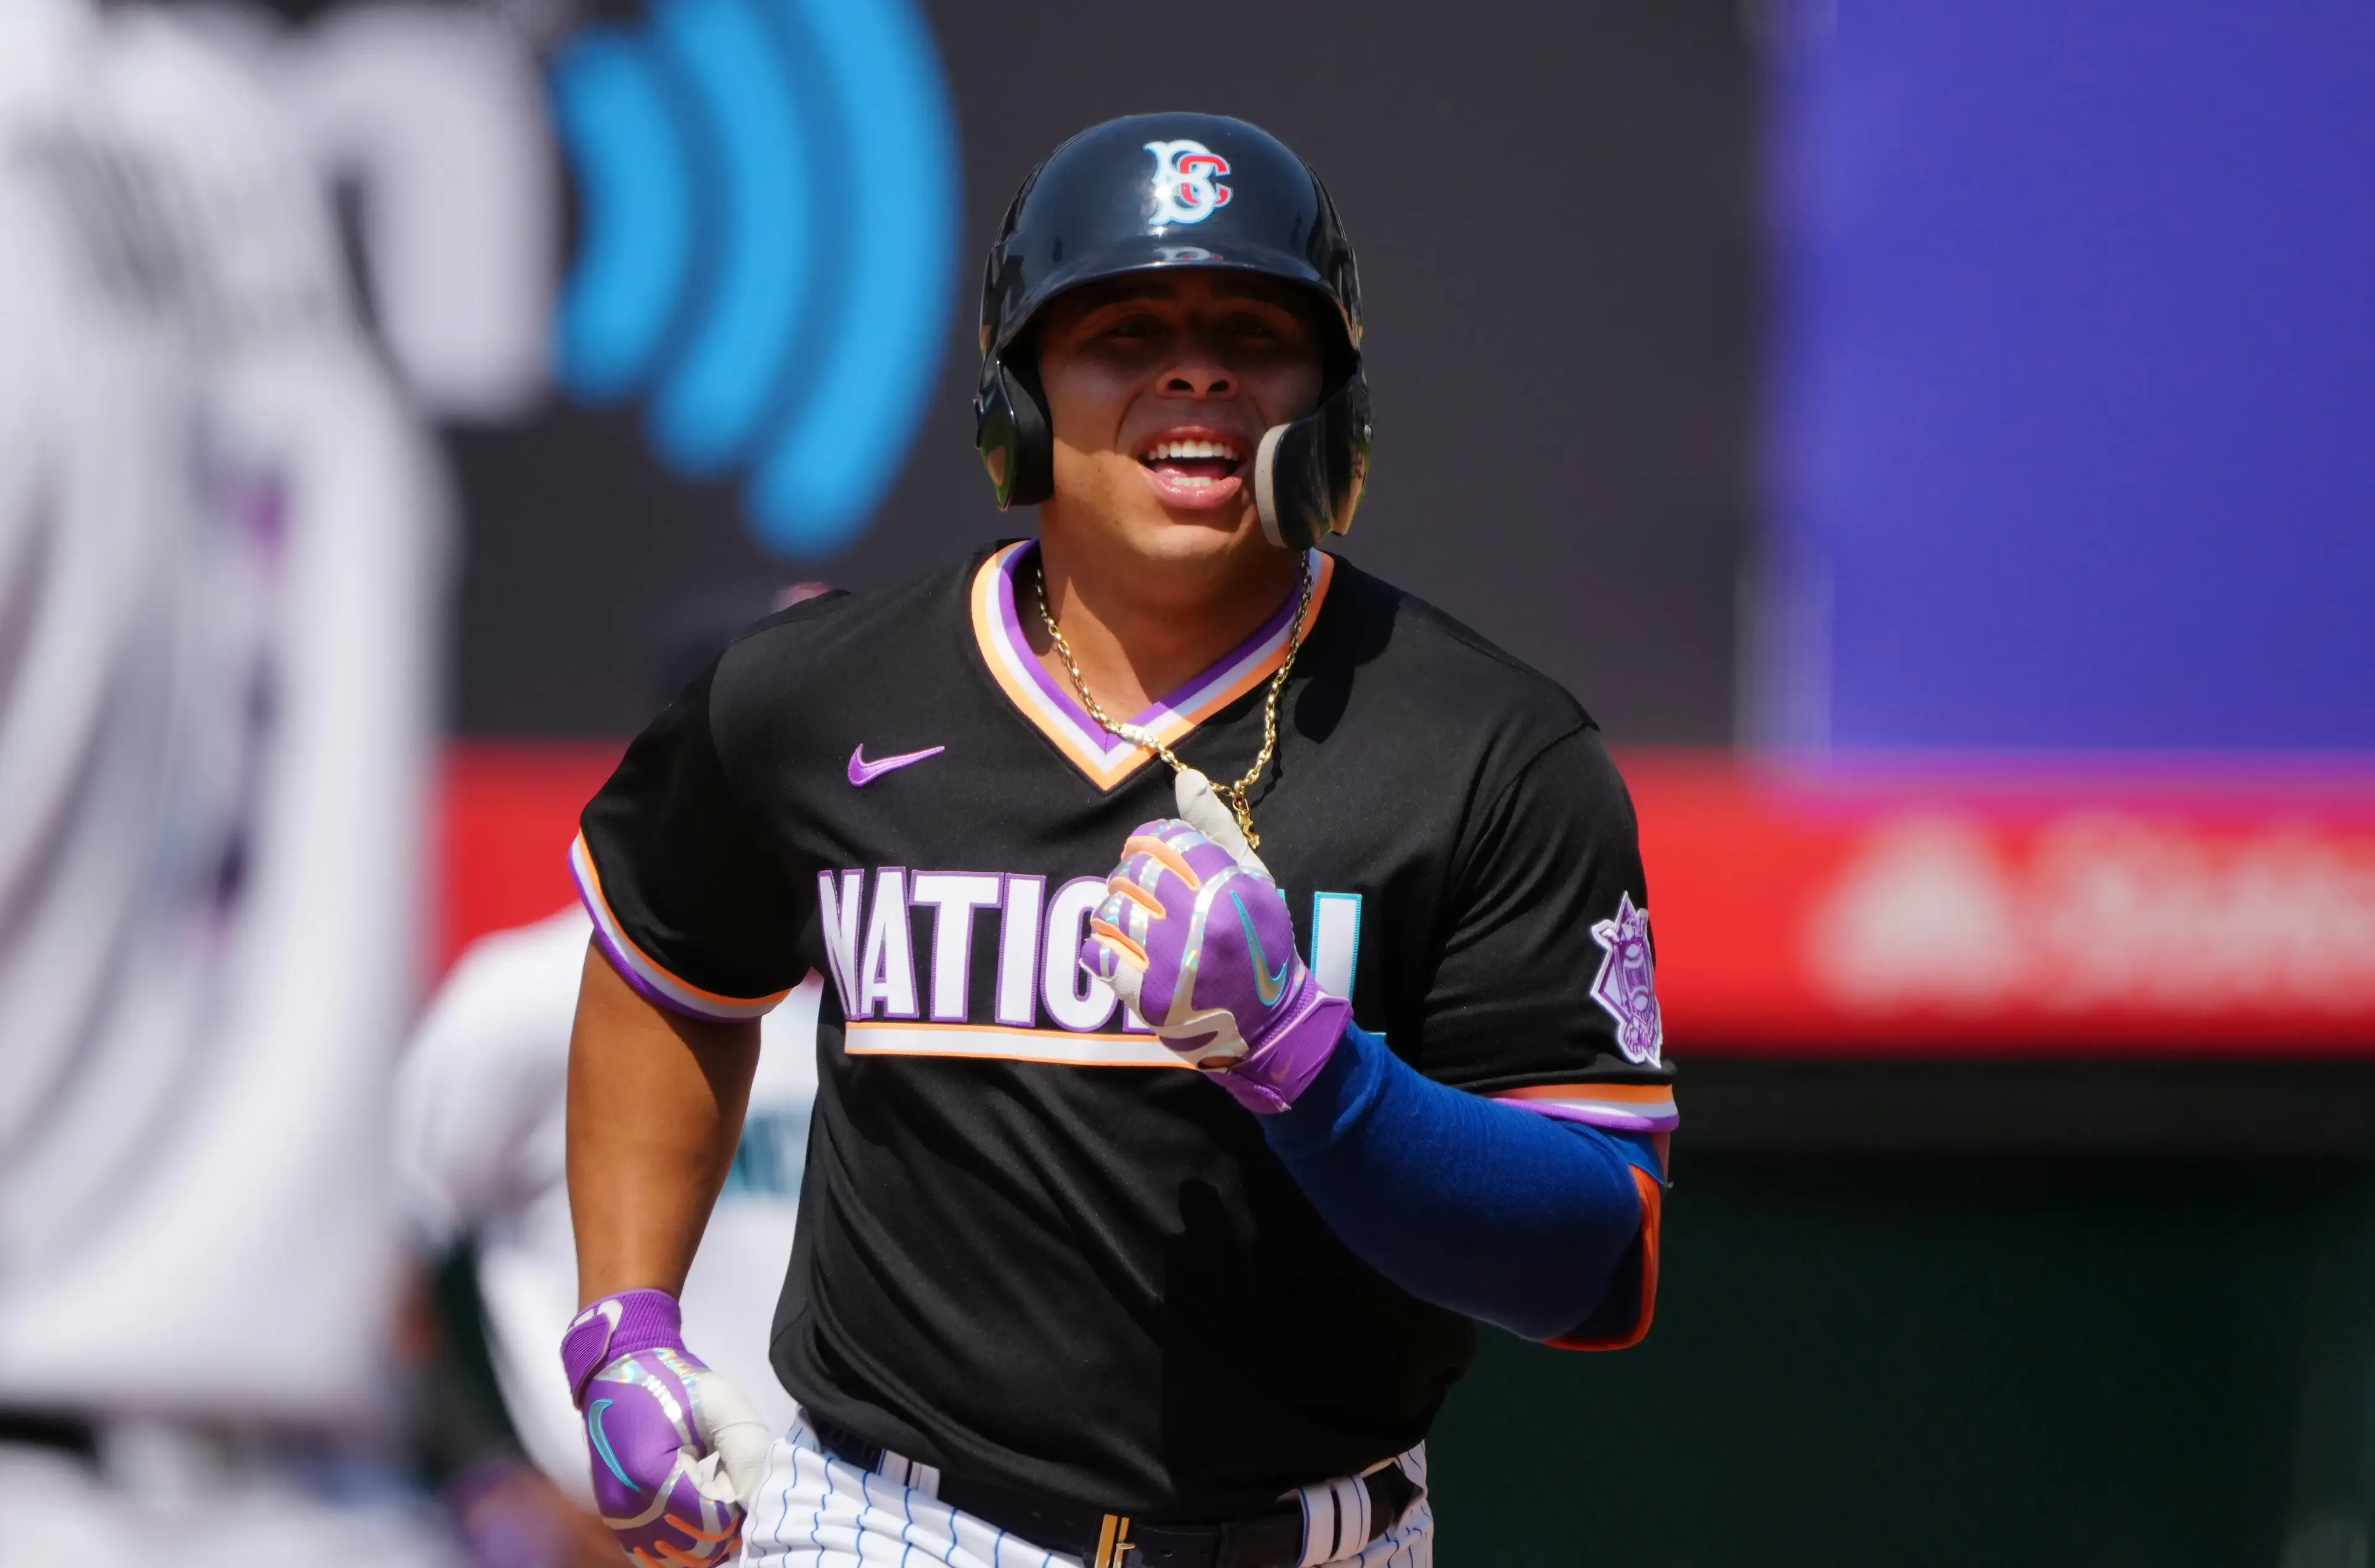 Jul 11, 2021; Denver, CO, USA; National League infielder Francisco Alvarez (30) rounds the bases after hitting a solo home run in the fifth inning against the American League of the 2021 MLB All Star Futures Game at Coors Field. Mandatory Credit: Ron Chenoy-USA TODAY Sports